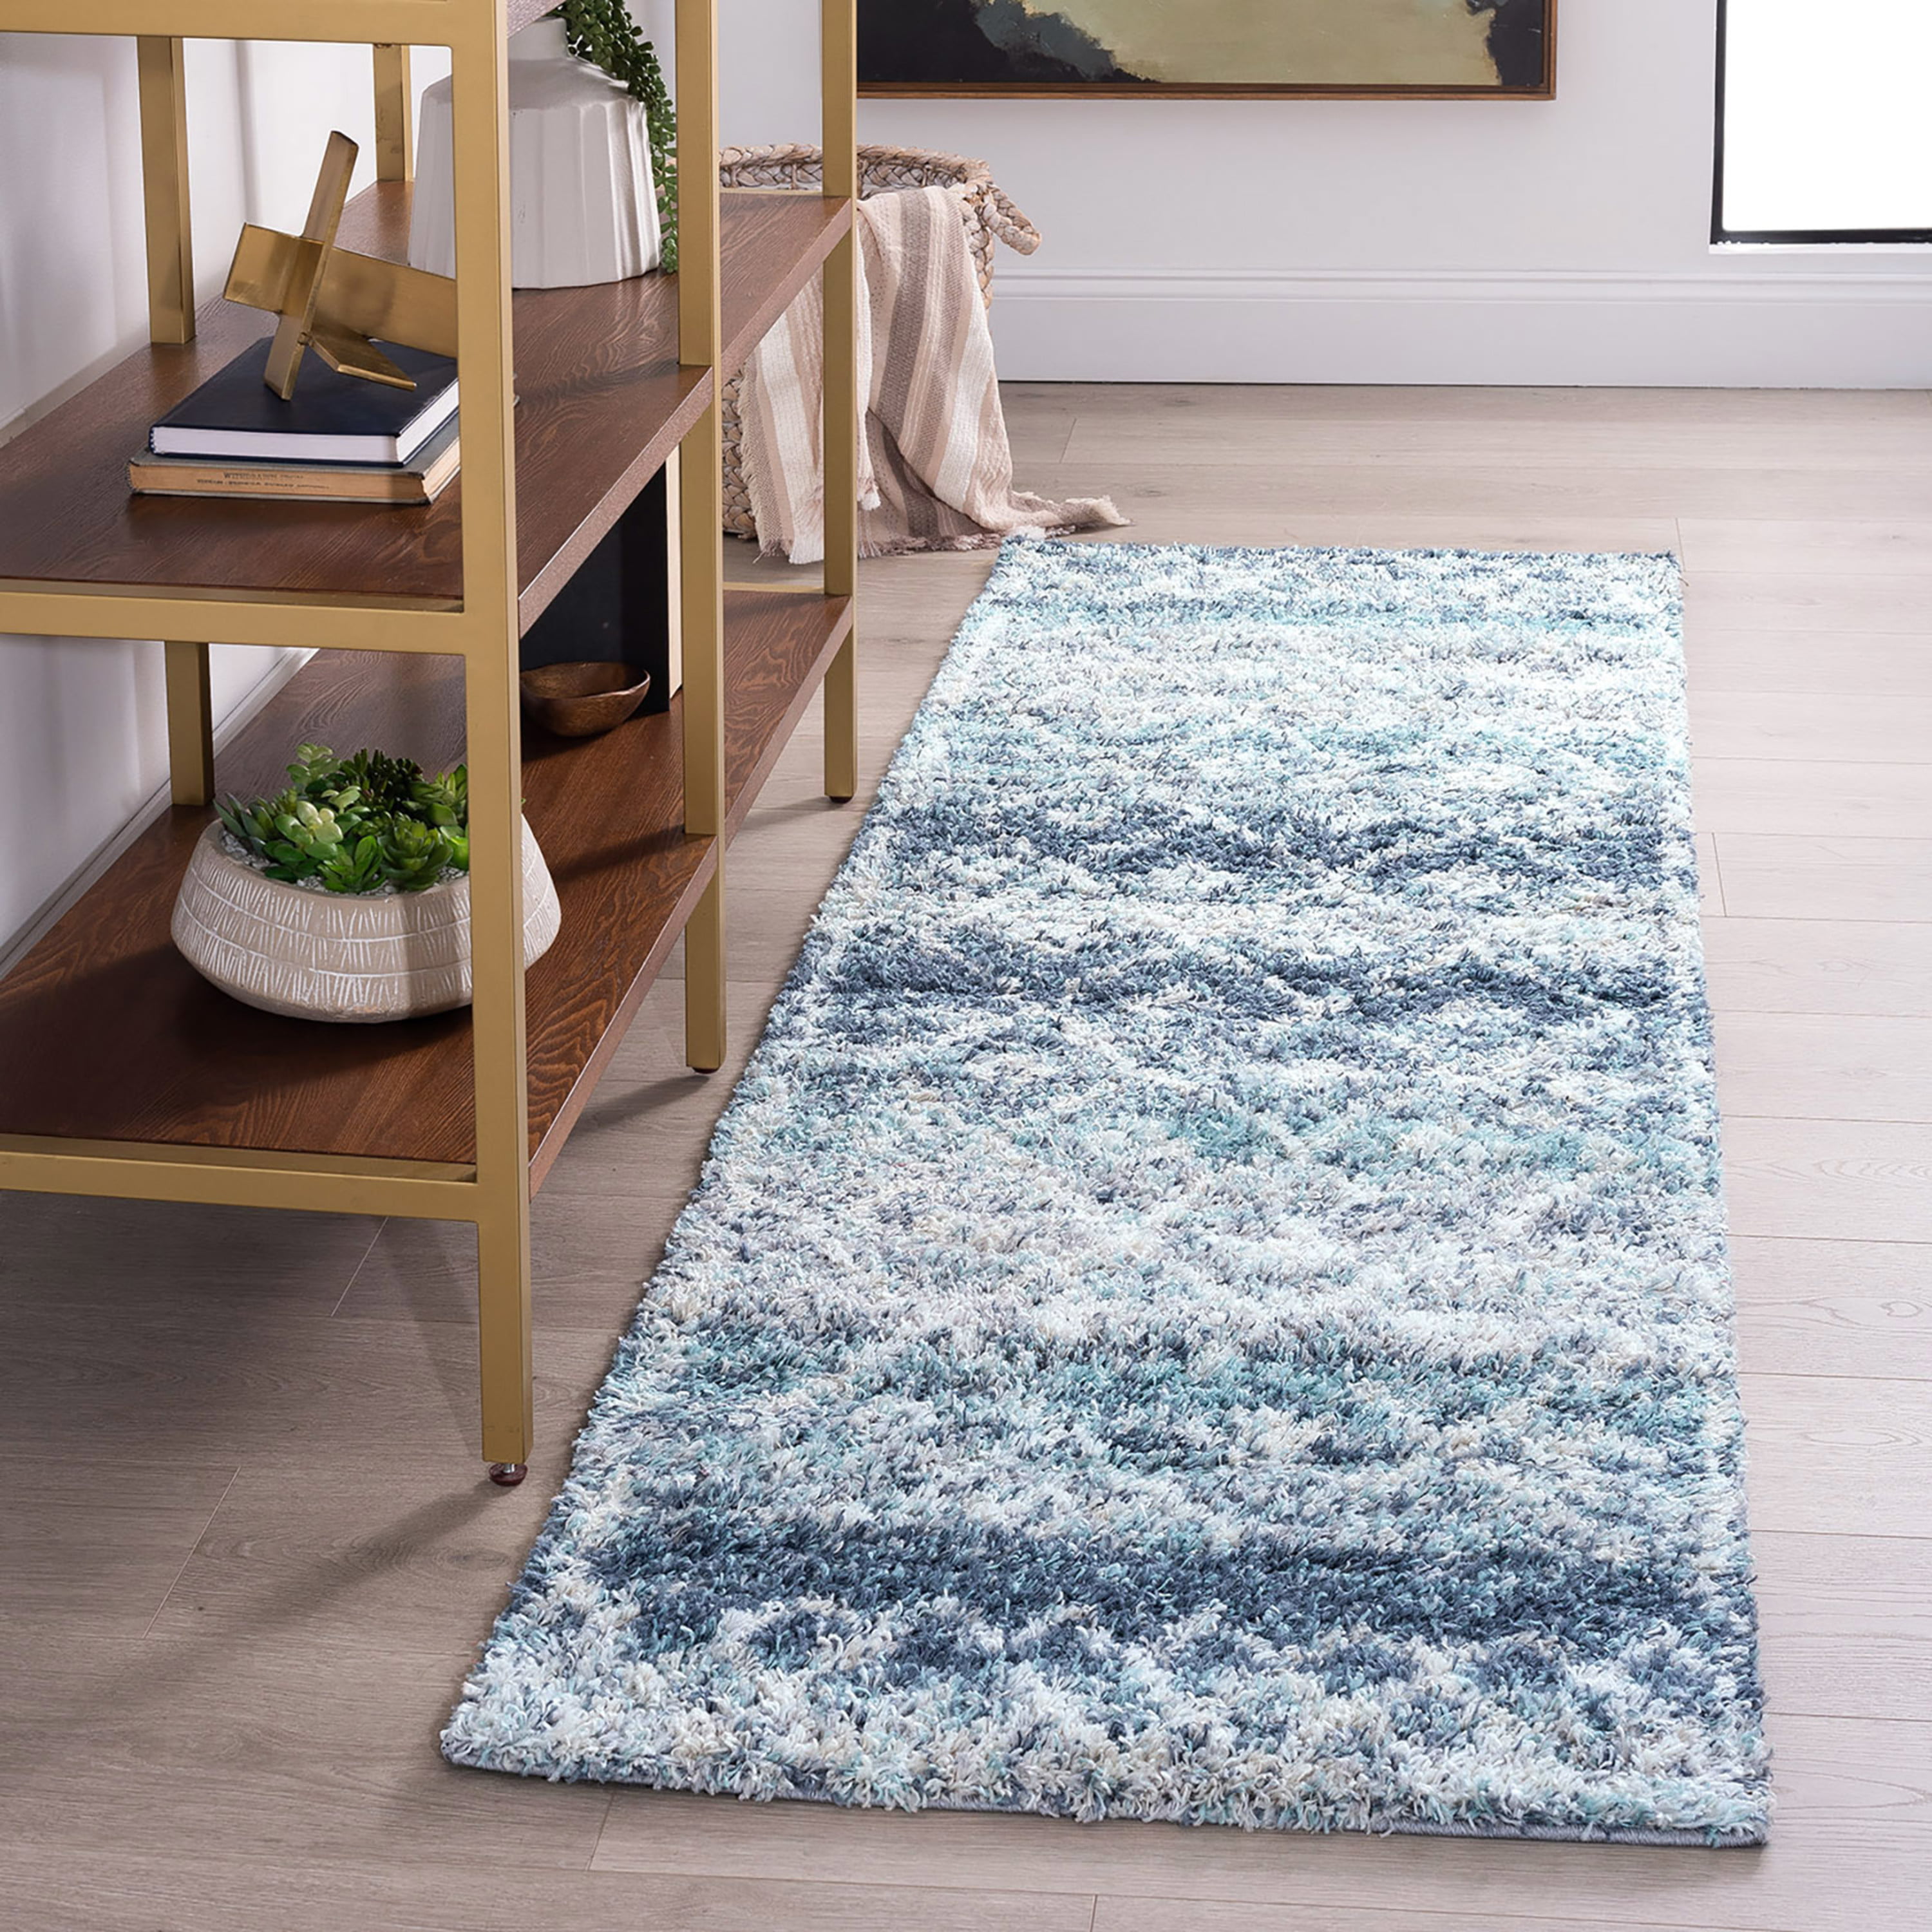 Duck Egg Shaggy Rugs Thick Non Shed Blue Geometric Living Room Rug Hall Runners 